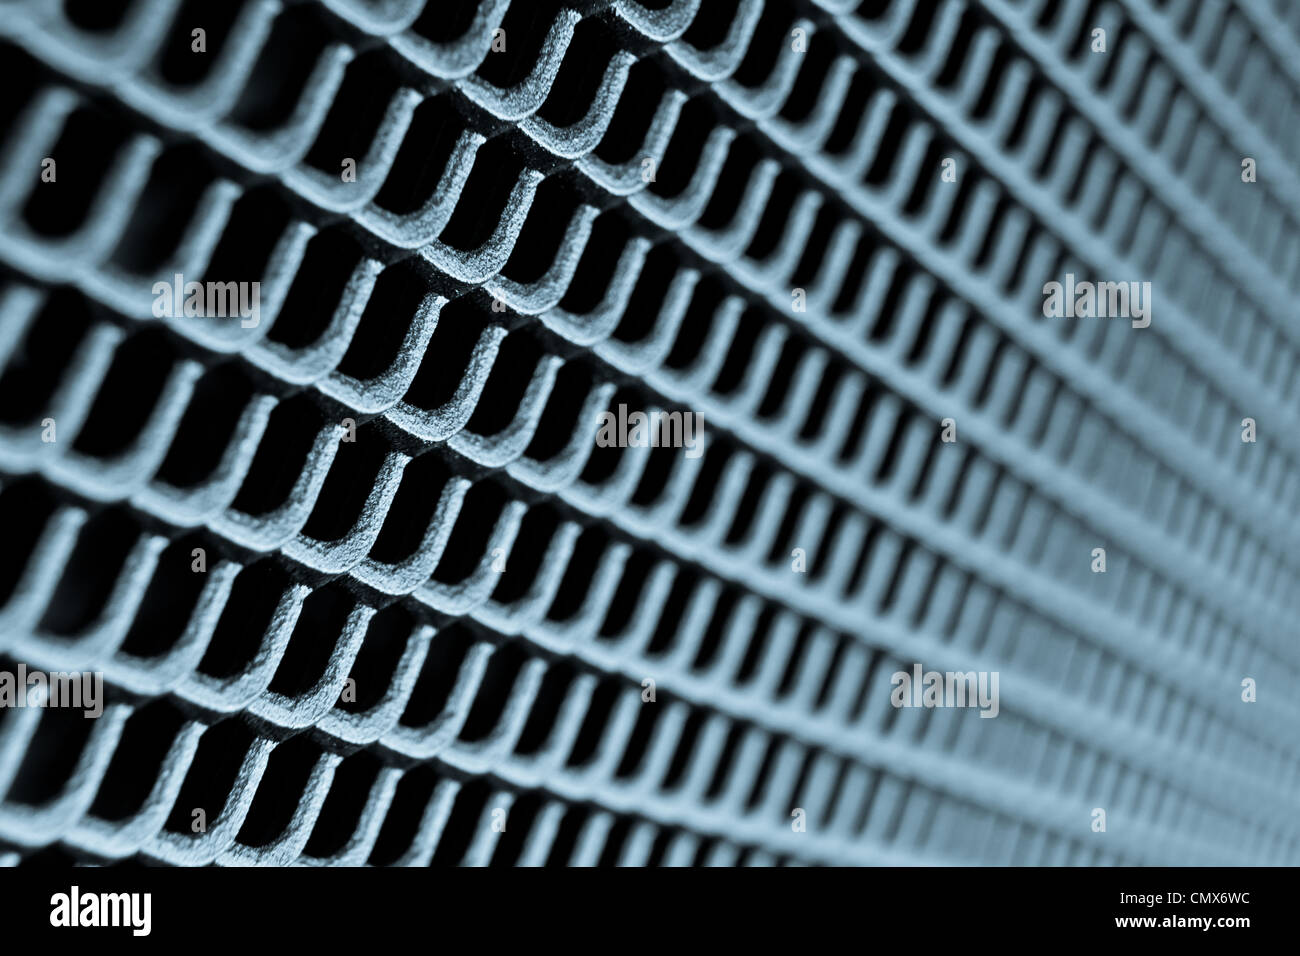 abstract metal grid background Stock Photo